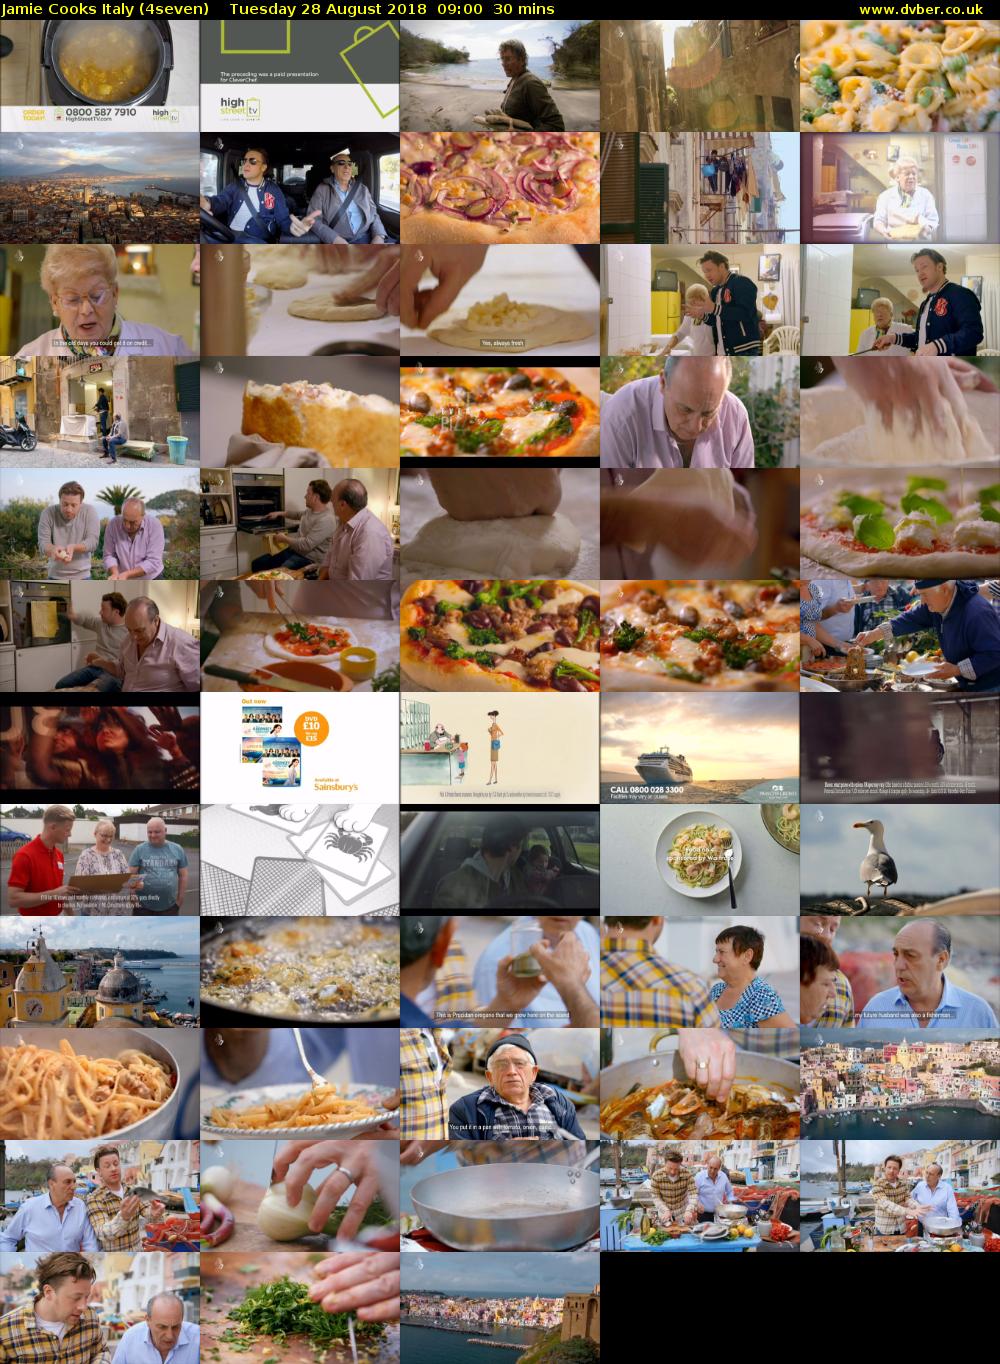 Jamie Cooks Italy (4seven) Tuesday 28 August 2018 09:00 - 09:30